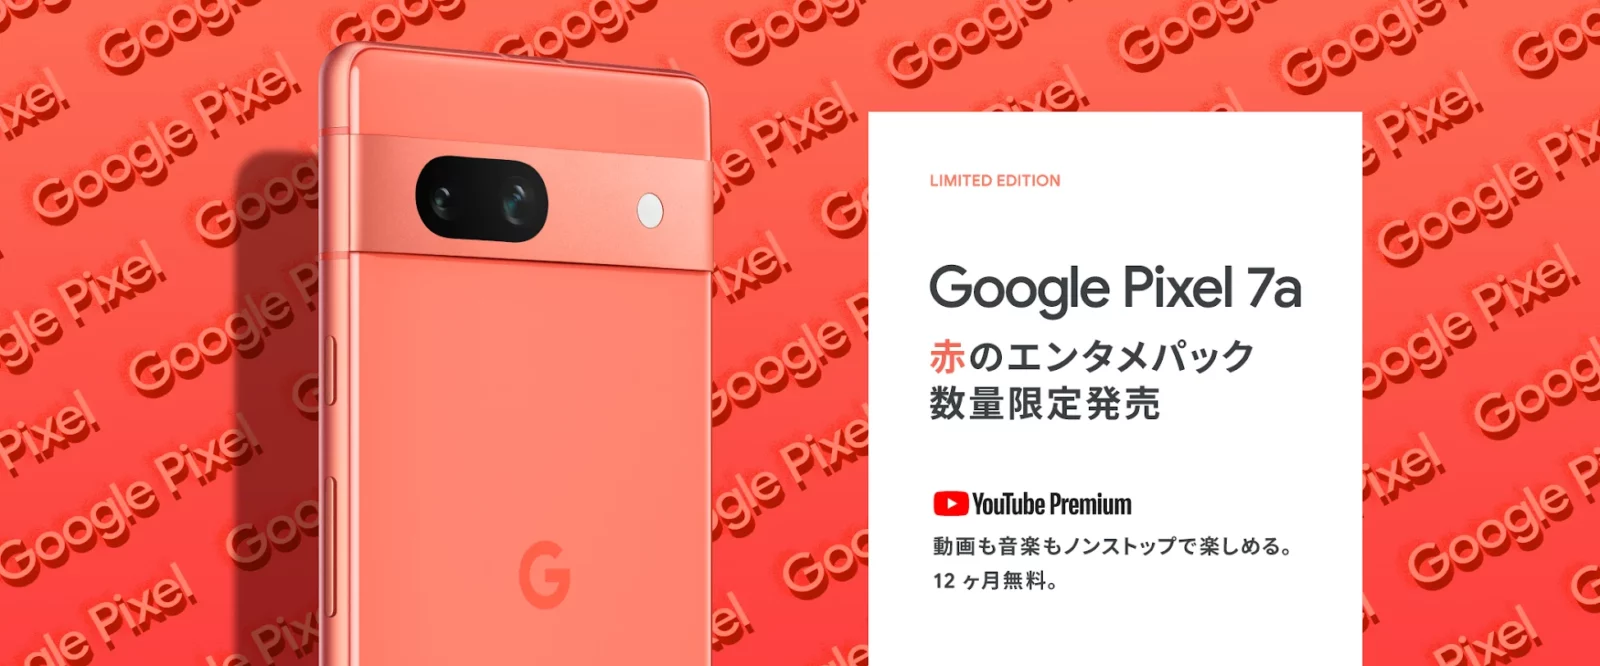 {google Store] 限定 Google Pixel 7a Coral 赤のエンタメパック